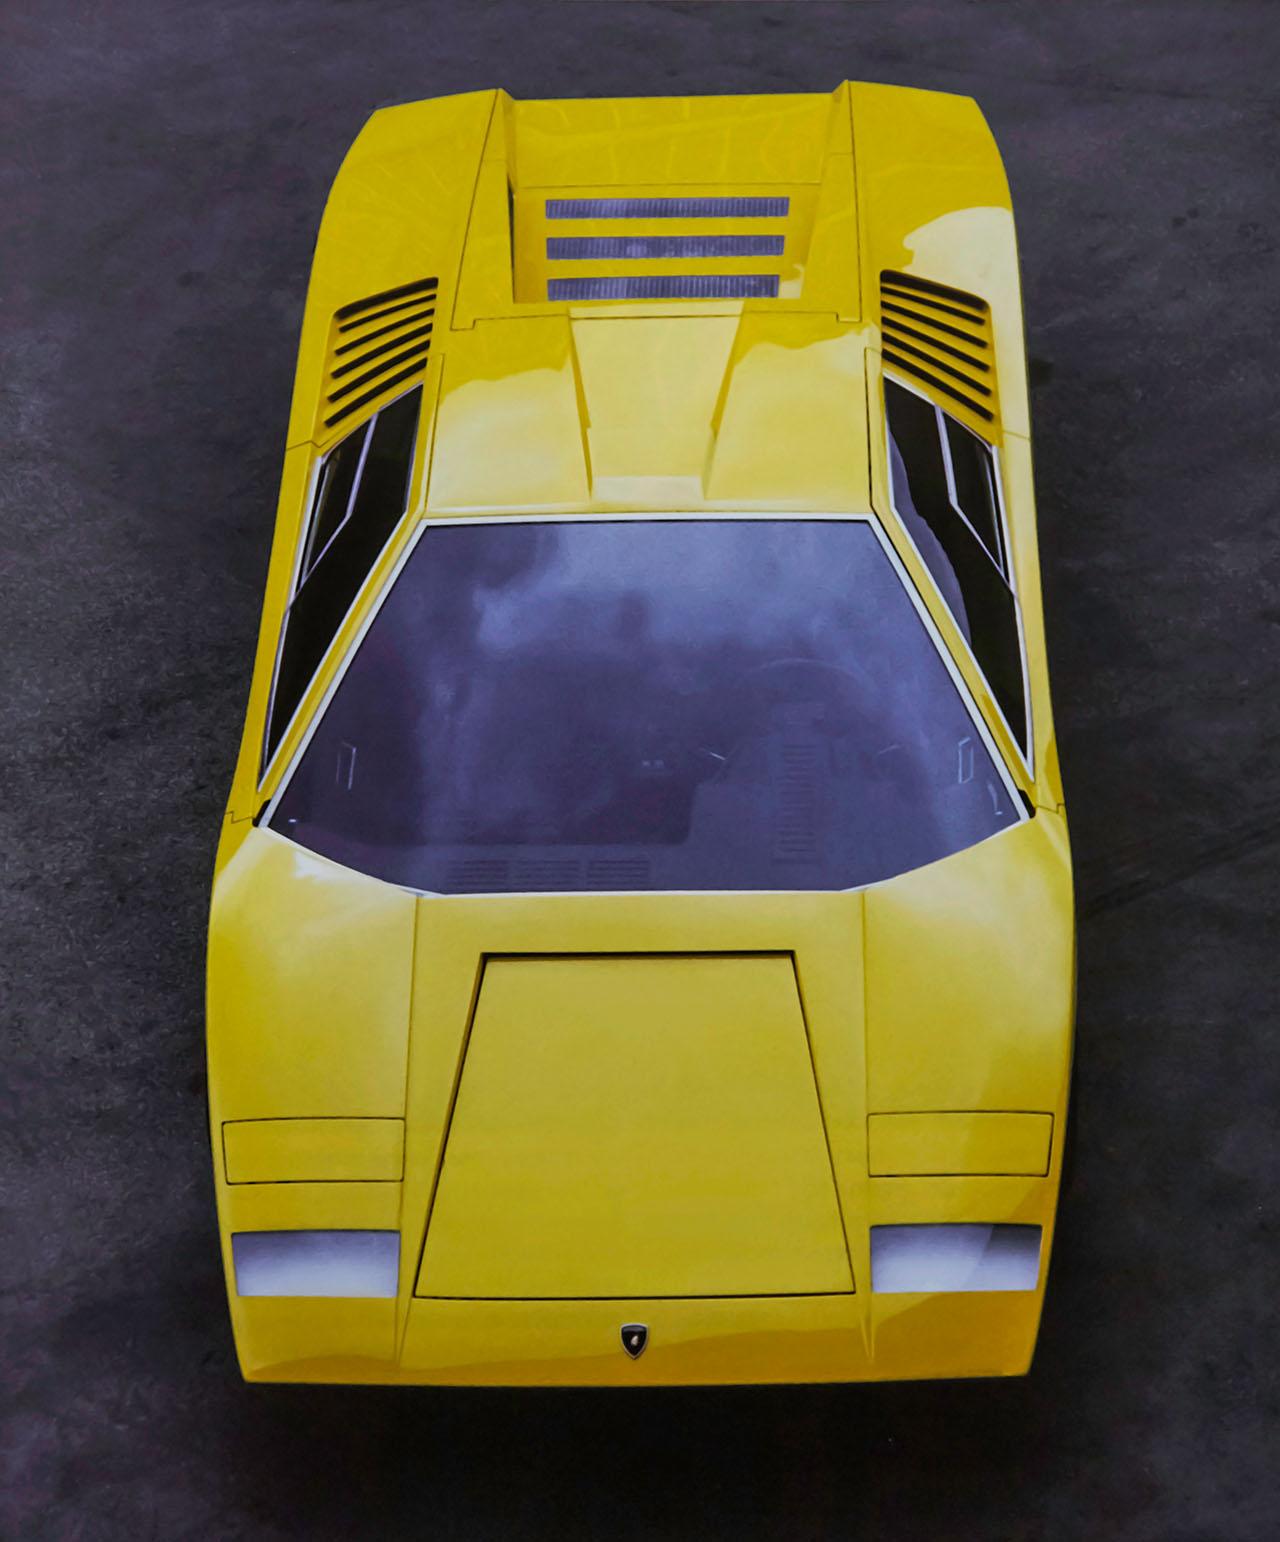 Top down view of a yellow countach prototype